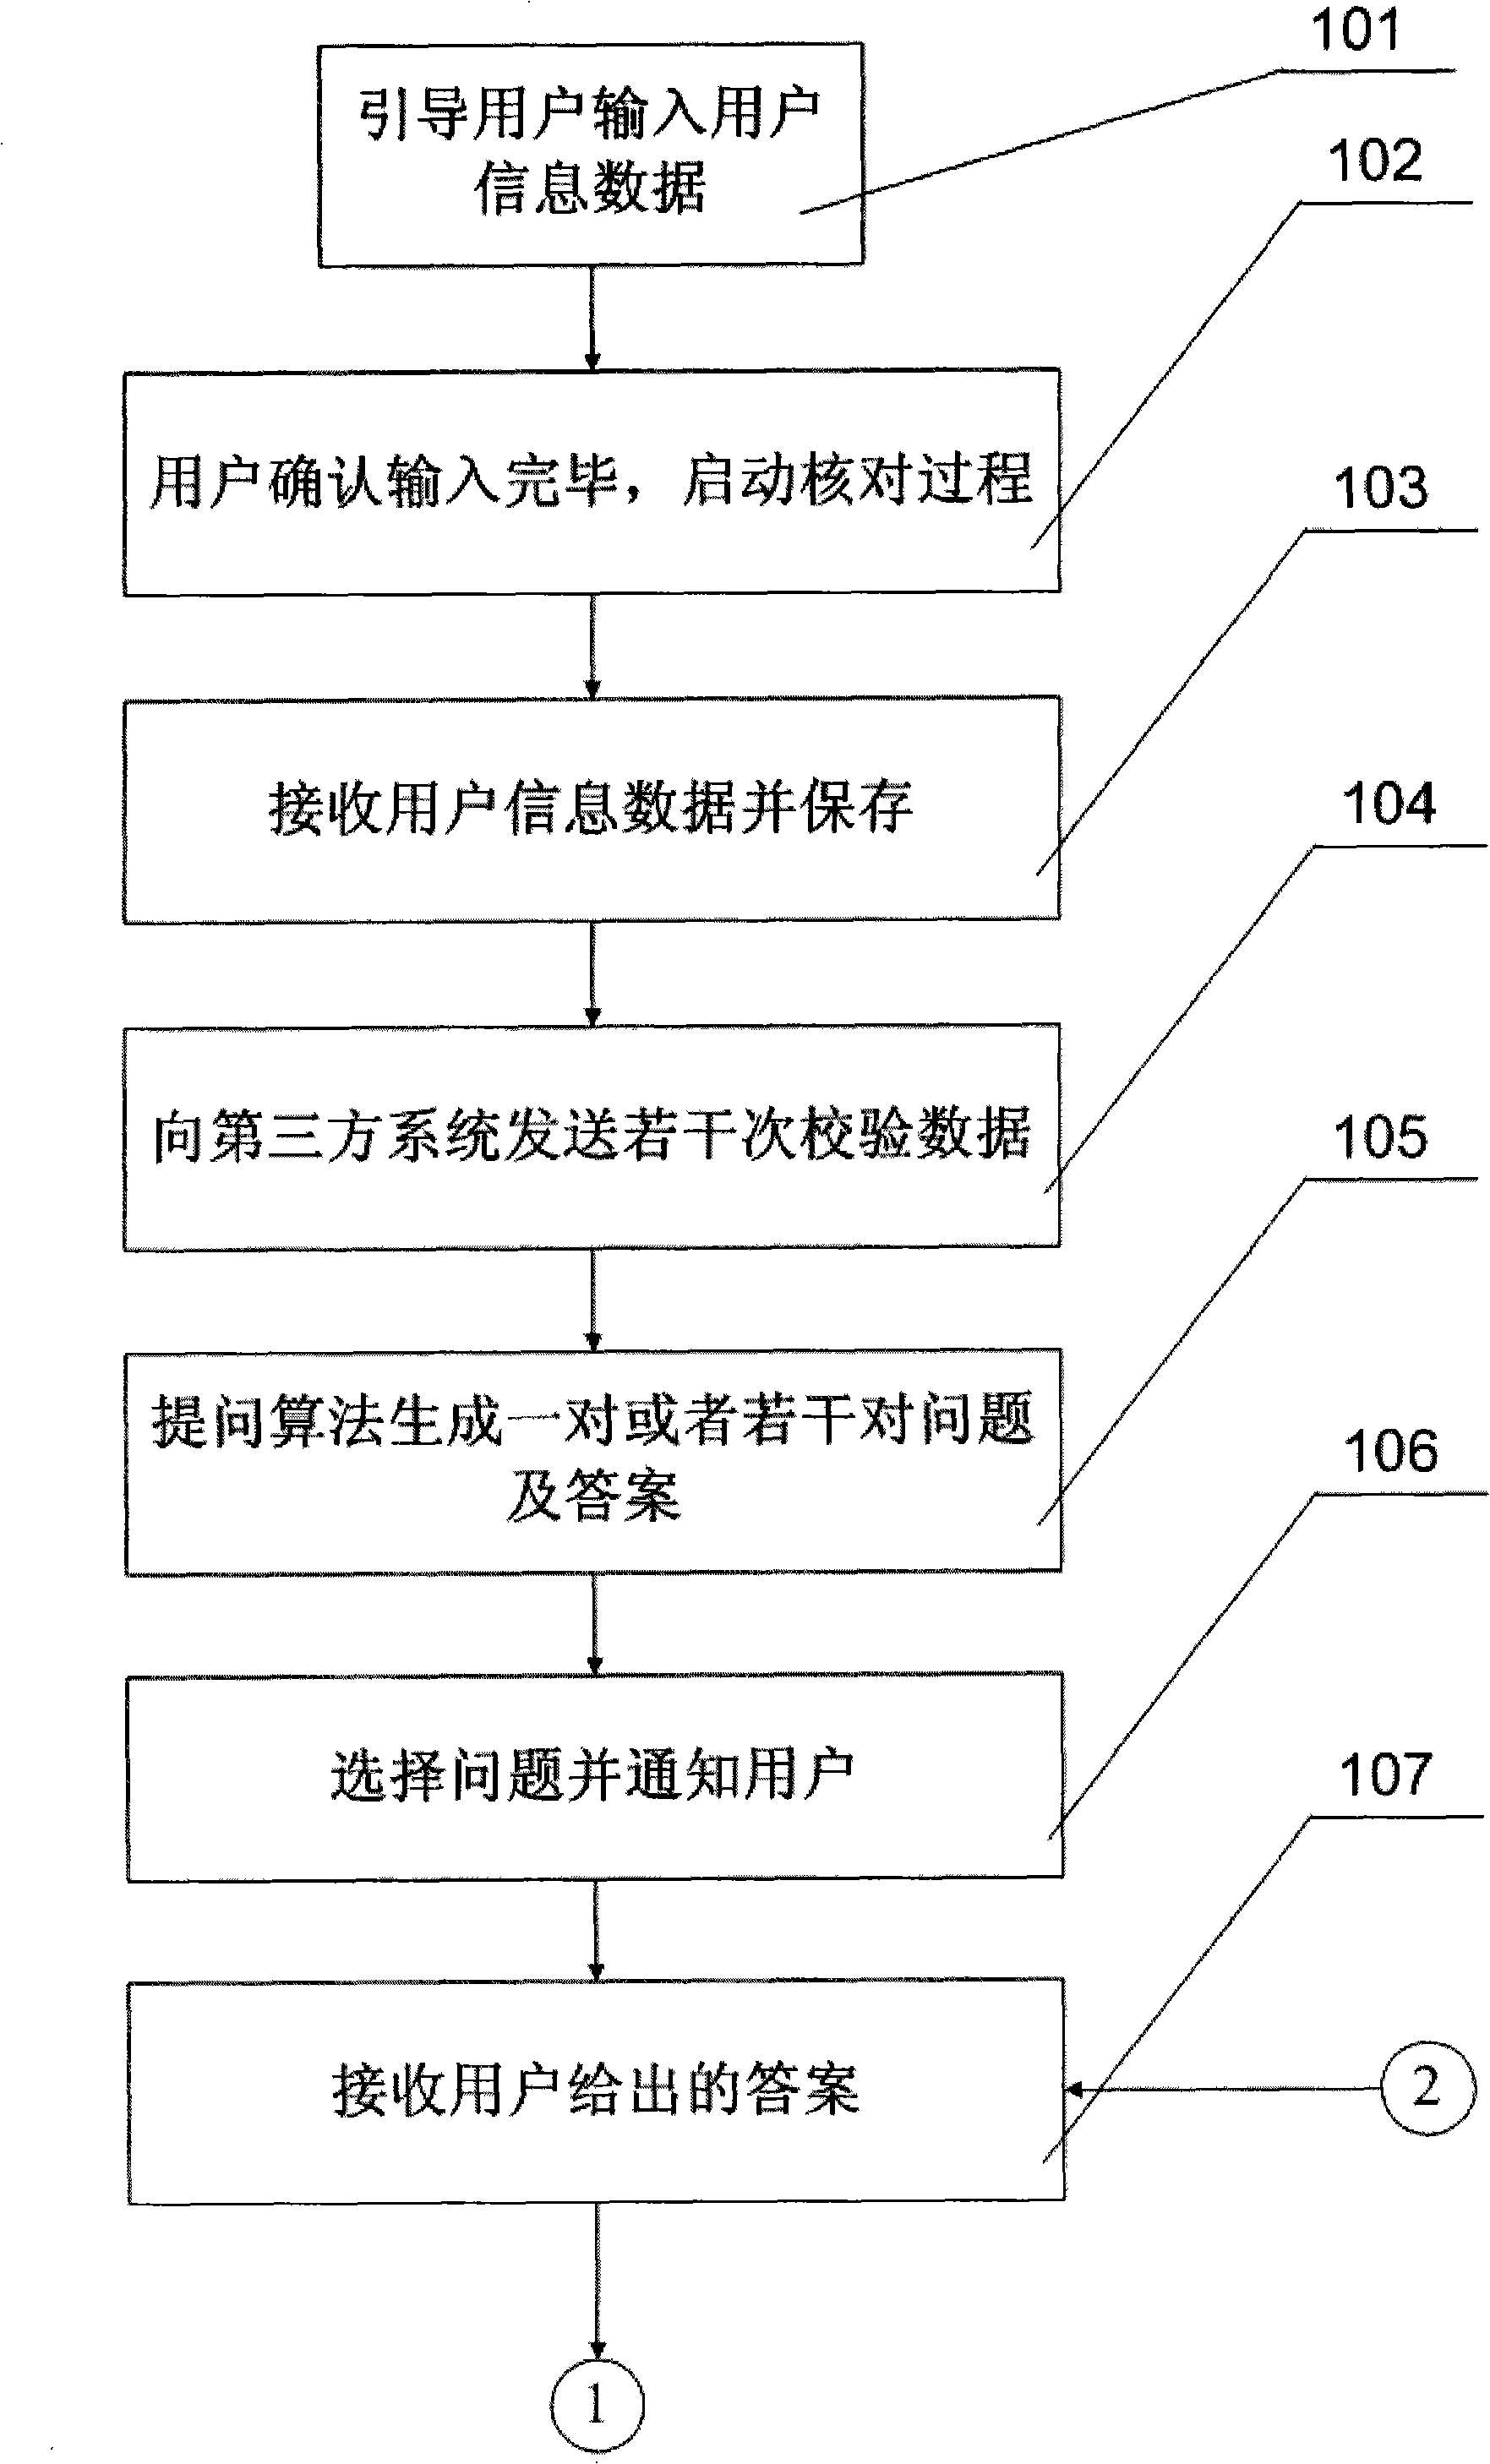 Method and system for user information check